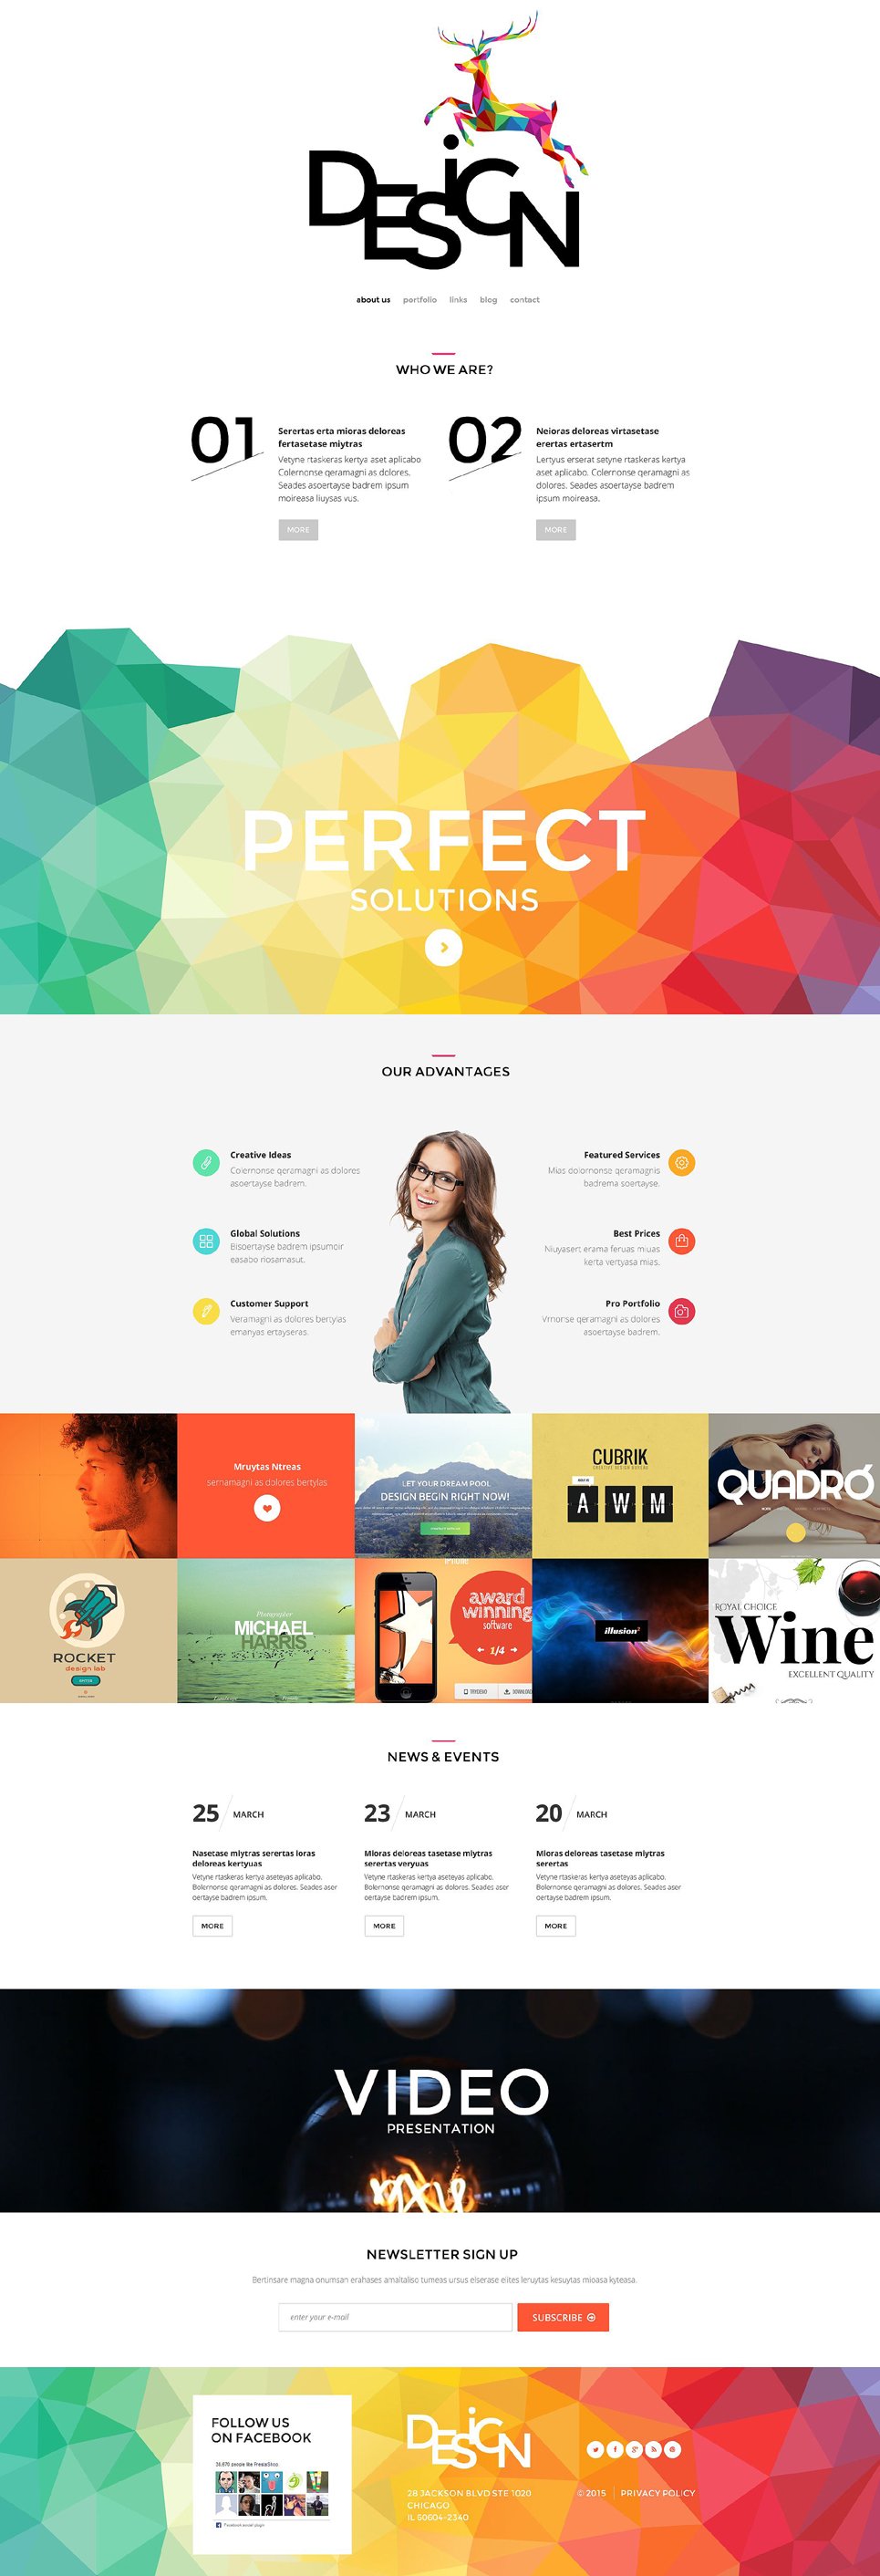 Graphic Design Website Template Free - thebigboxdesigns